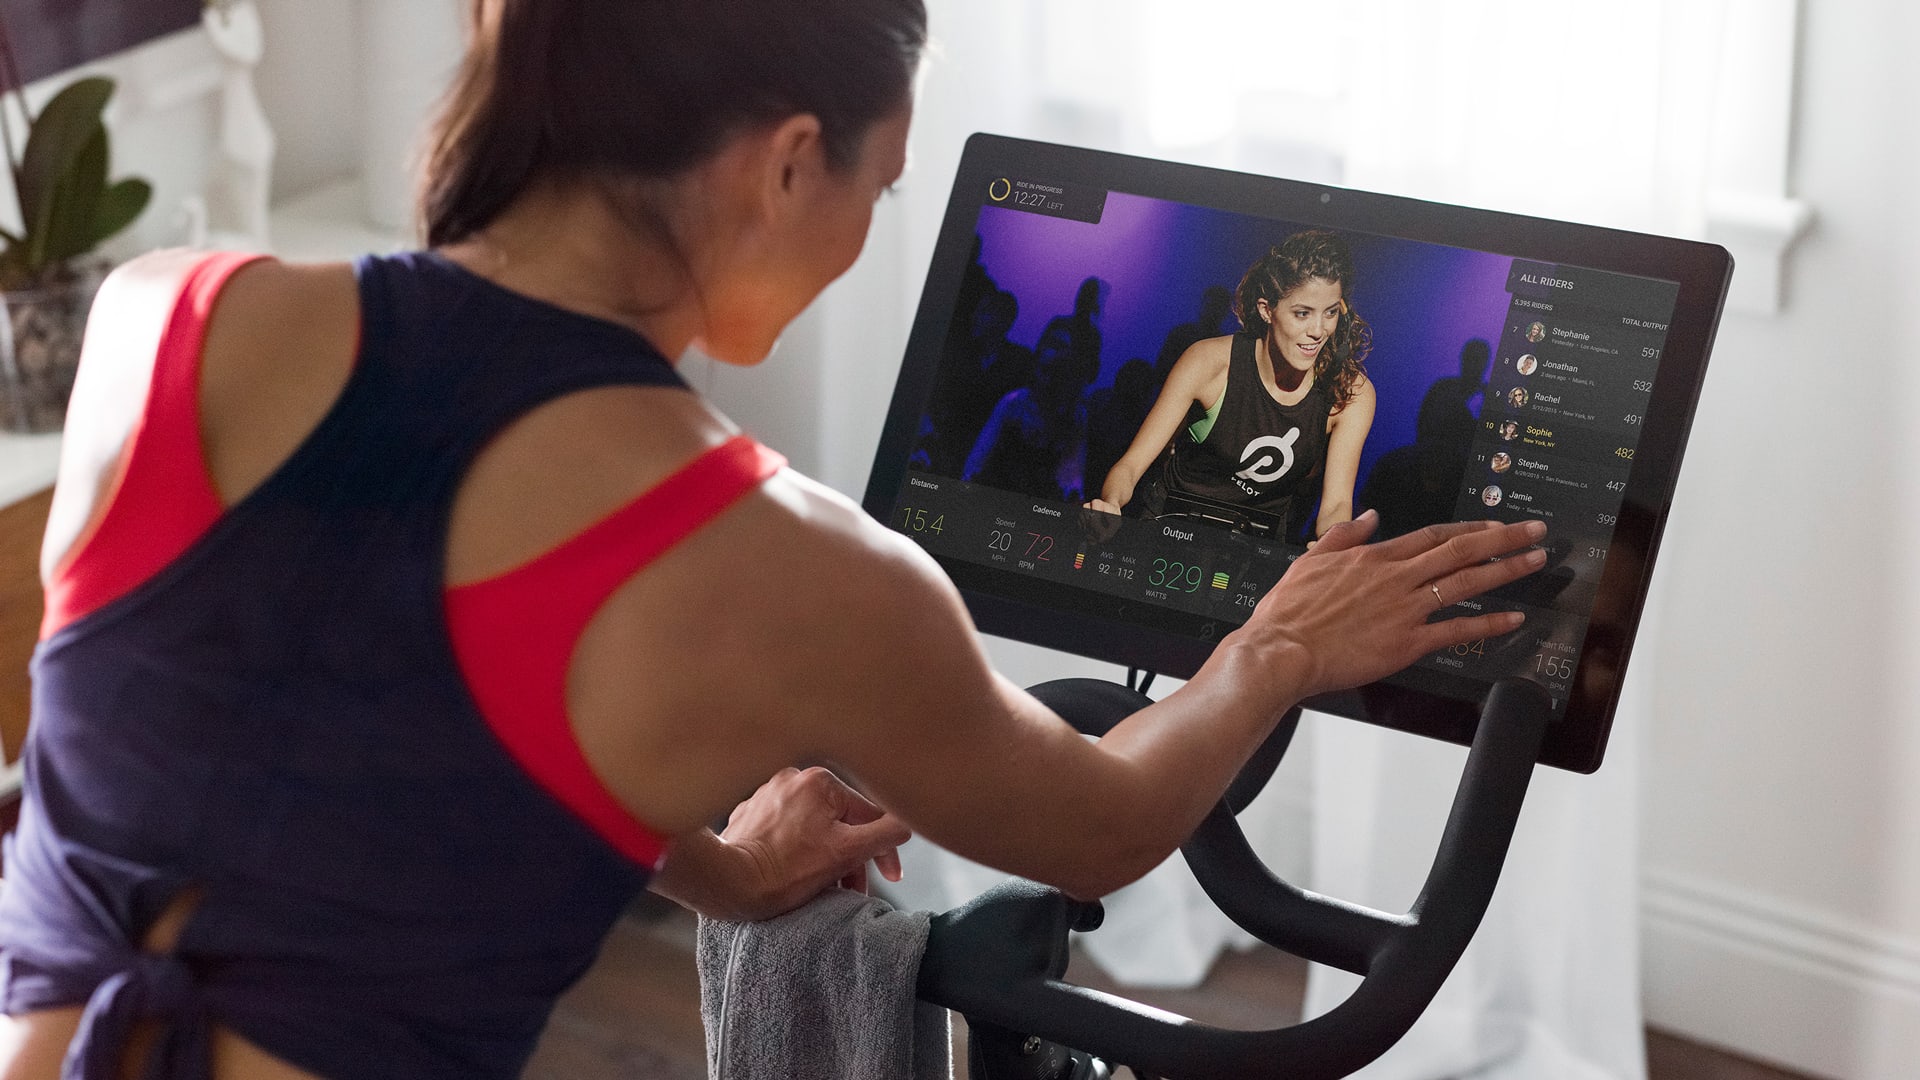 Peloton had 4% more customers than SoulCycle last quarter: Report